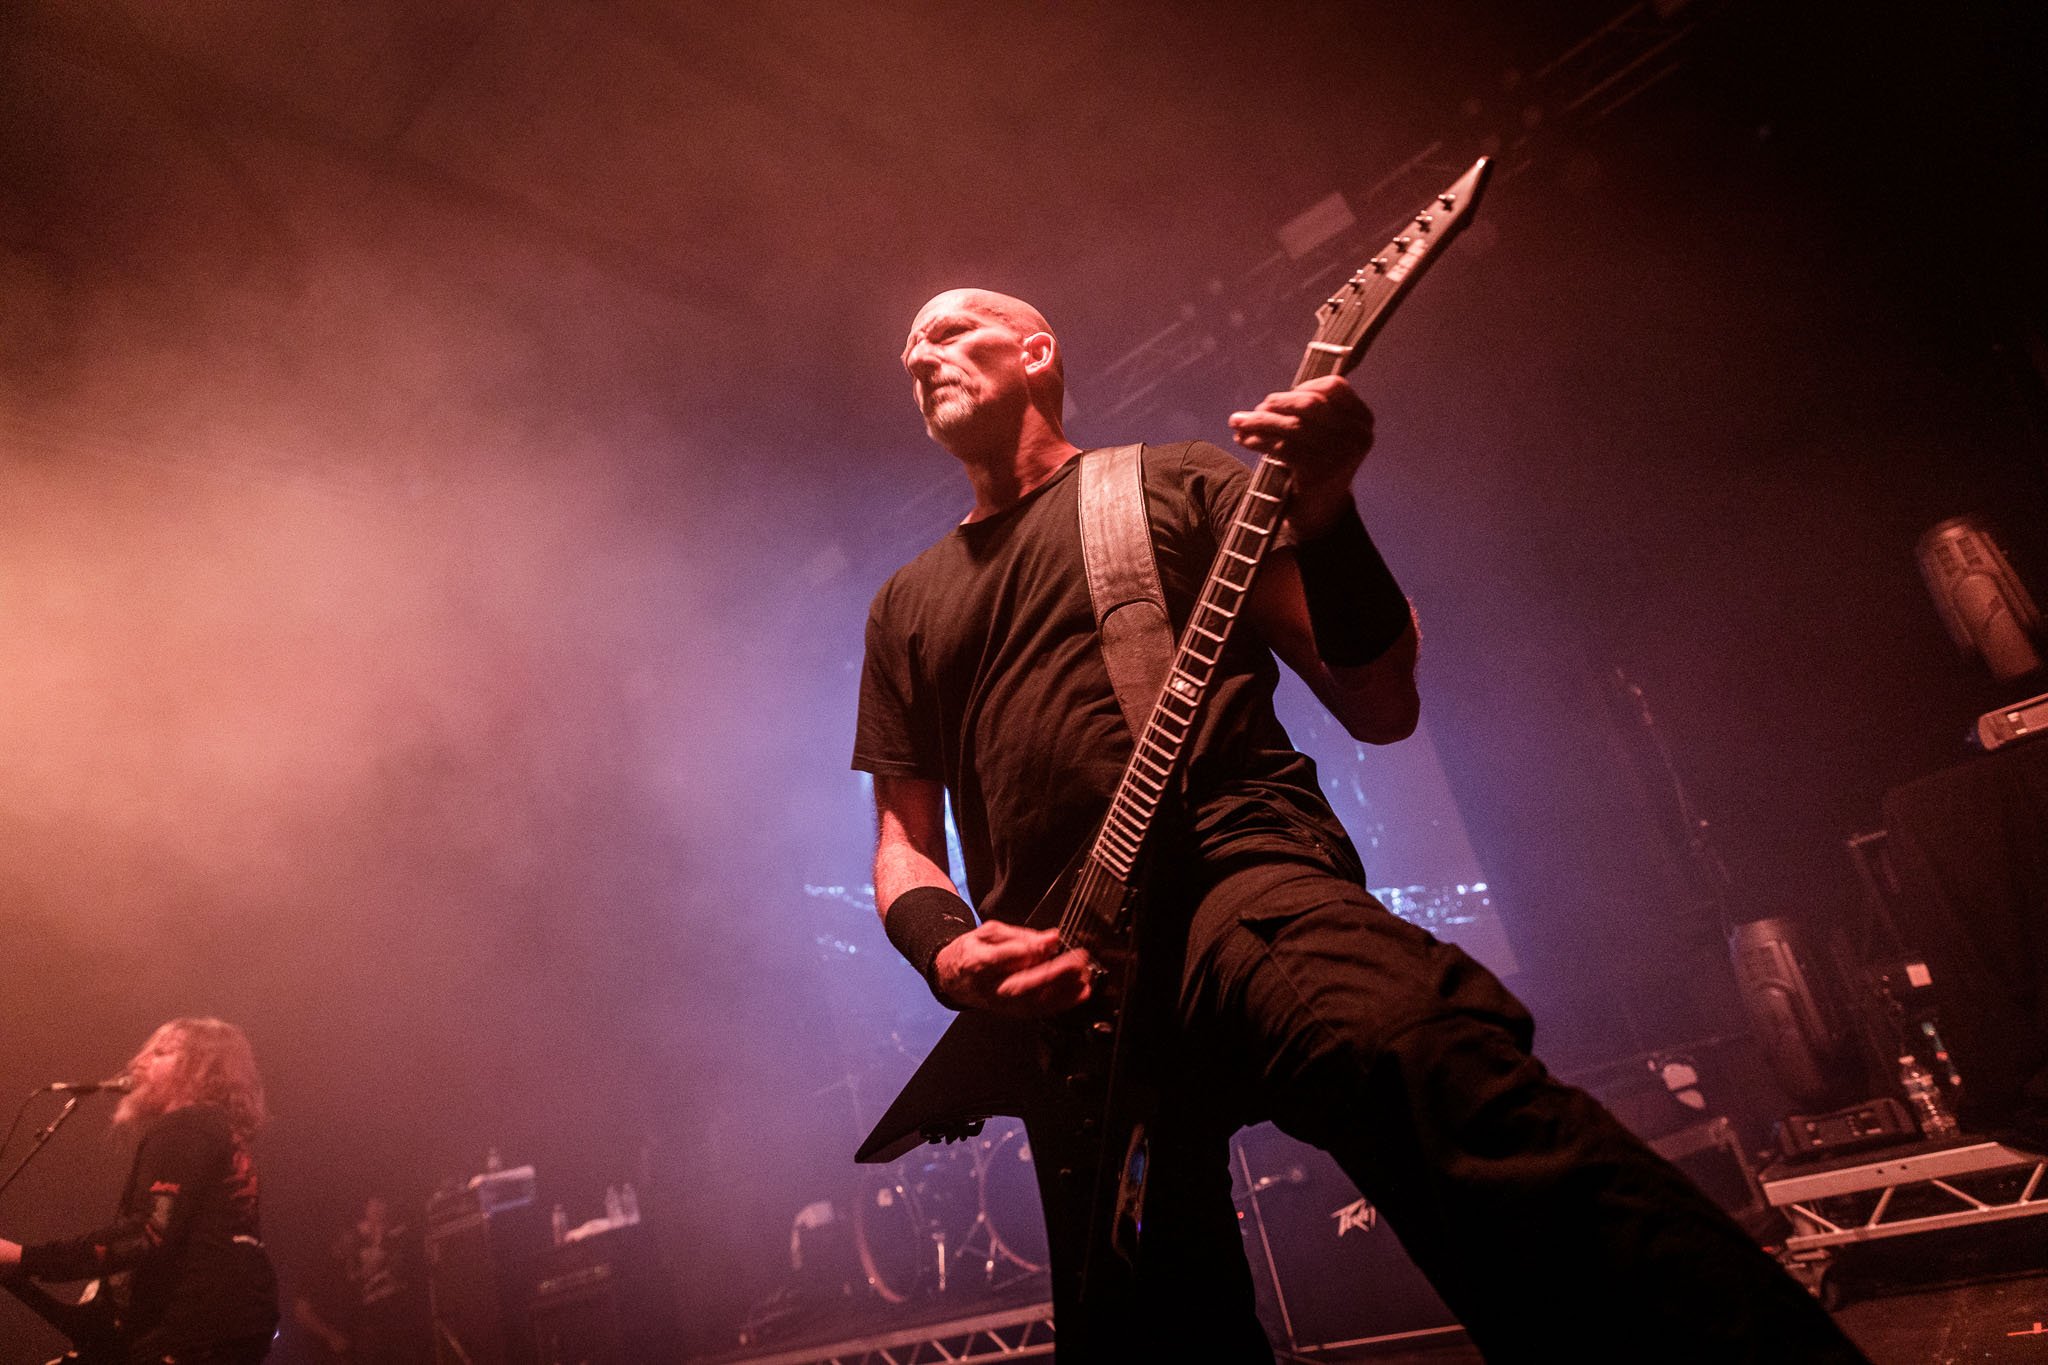 Misery Index at the Damnation Festival in Manchester on  at the 